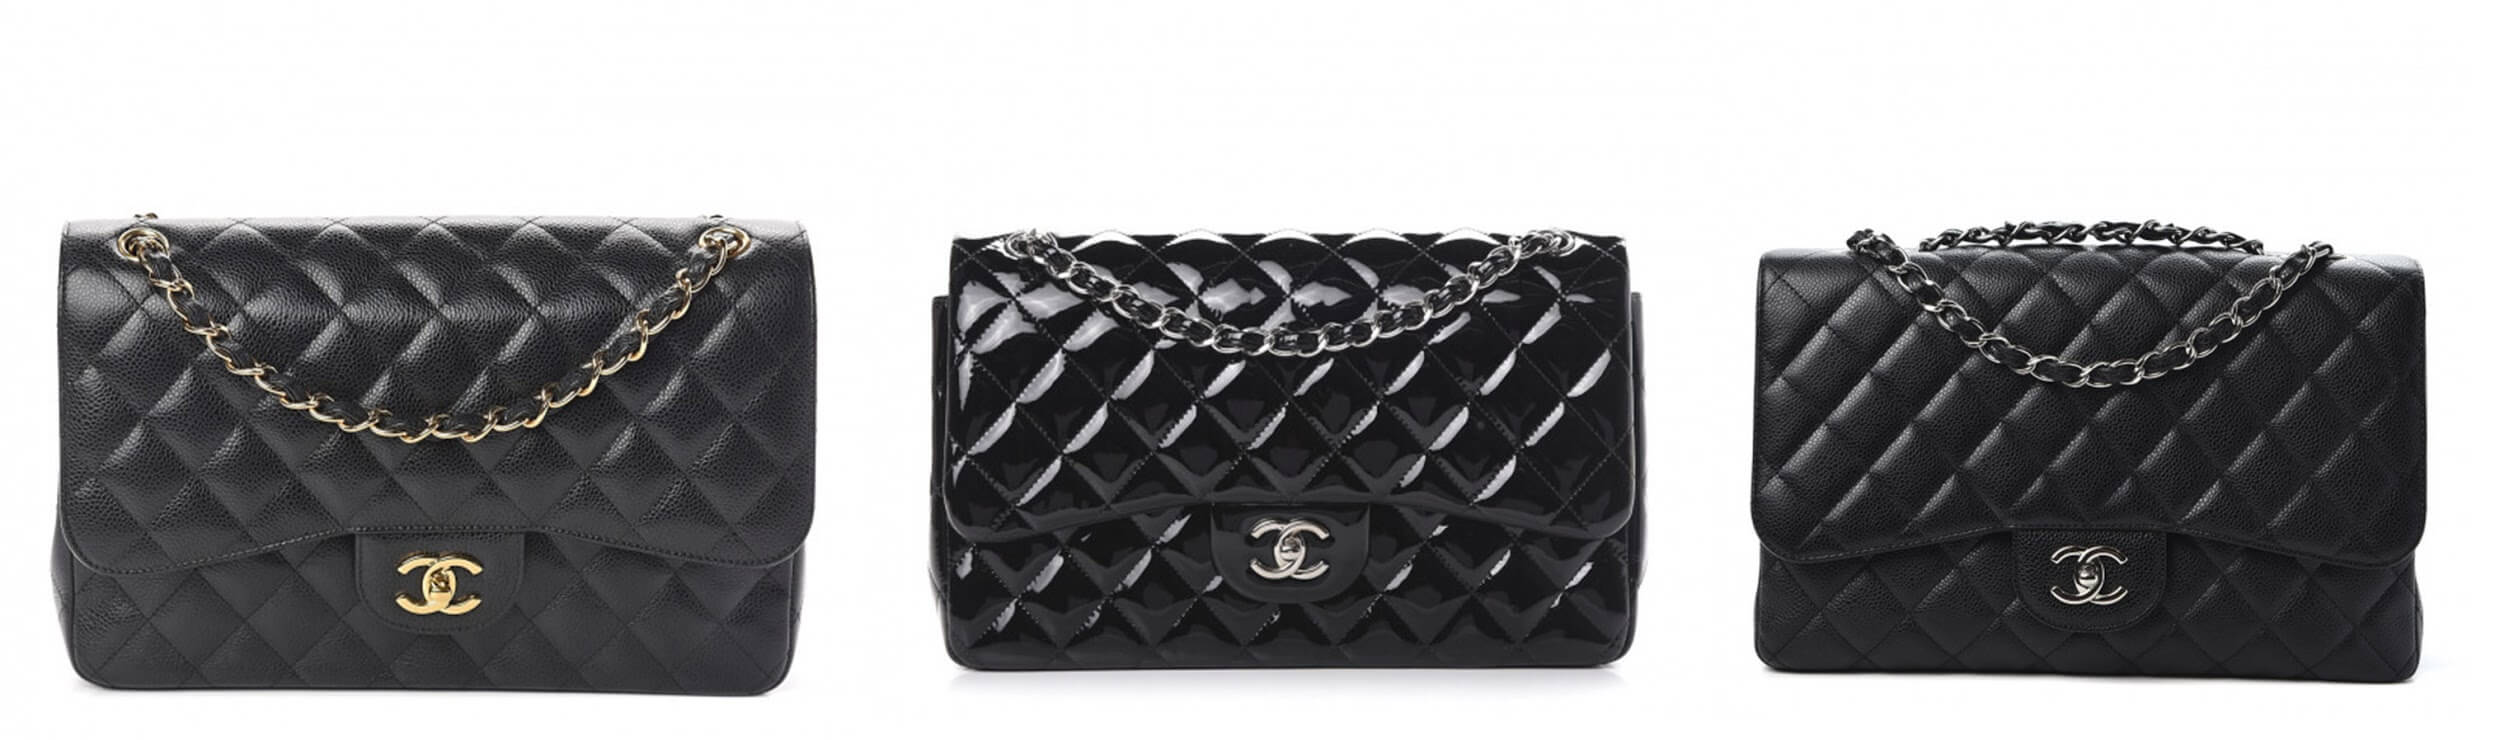 Guide to Purchasing Your First Chanel Bag